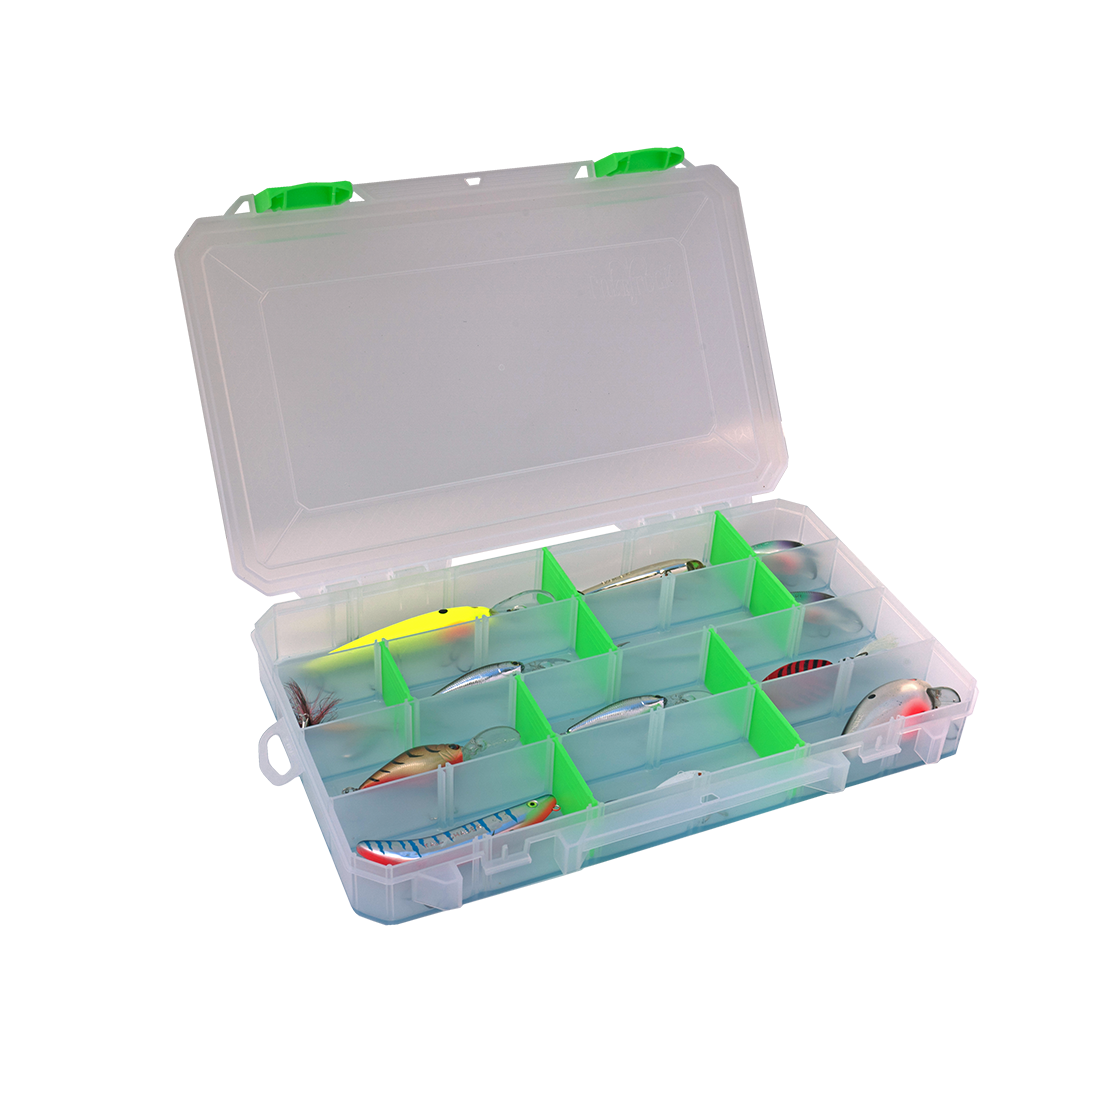 Large 4-in-1 Deep Tackle Box w/TakLogic Technology by Lure Lock at